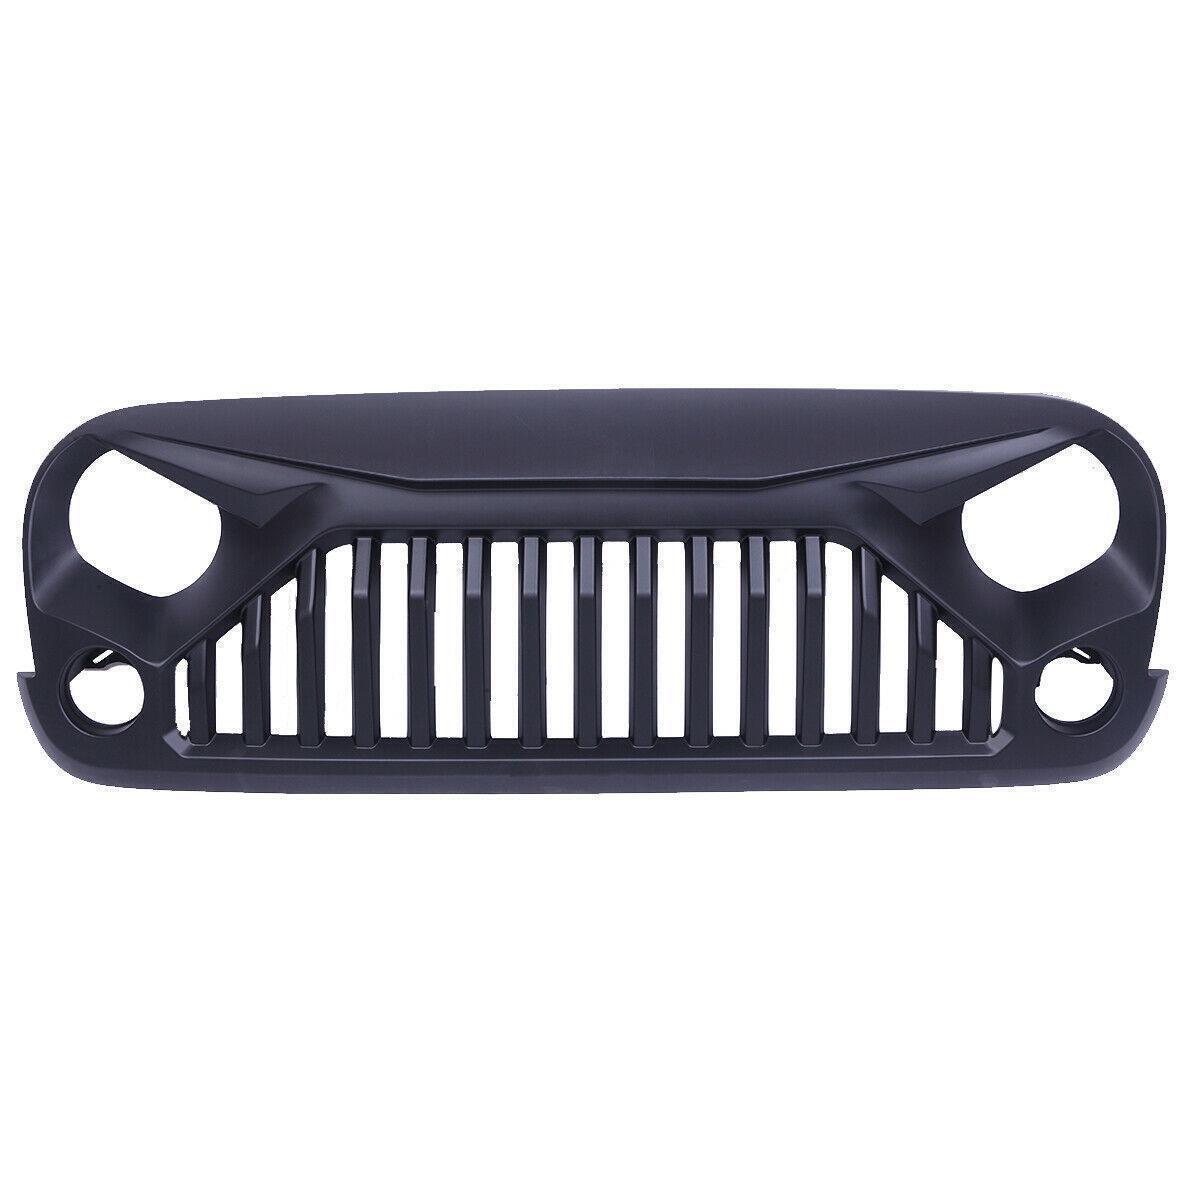 Primary image for US STORE For 2007-2017 JEEP Wrangler JK Front Bumper Grille Grill